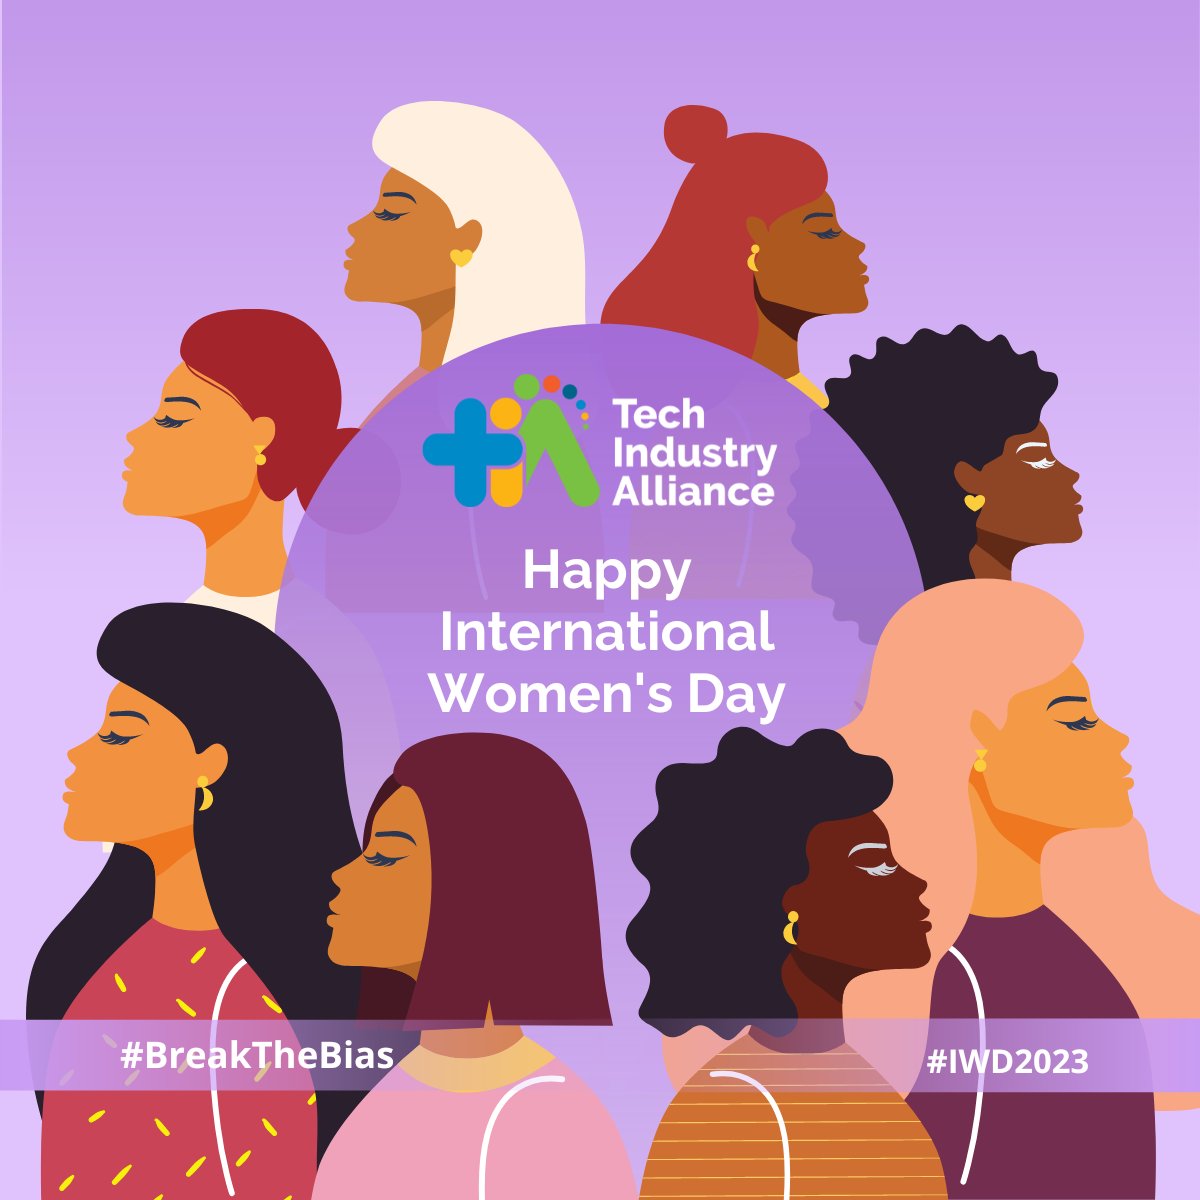 From everyone in Tech Industry Alliance - Happy International Women's Day to all of the powerful and inspiring women in South West region and around the world! #IWD23 #InternationalWomensDay #HappyInternationalWomensDay